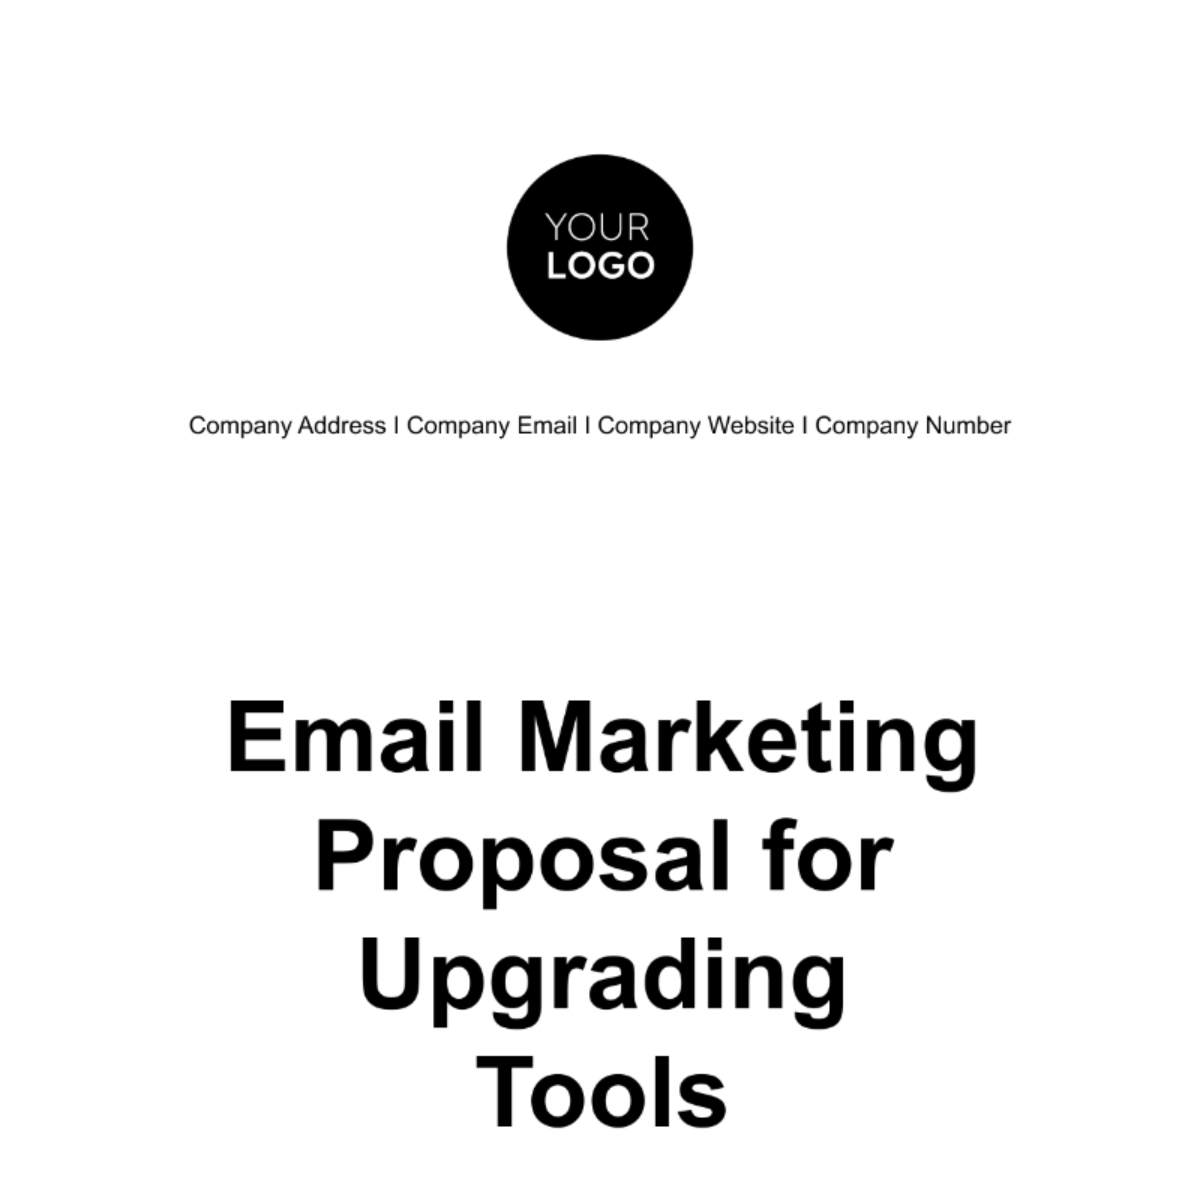 Free Email Marketing Proposal for Upgrading Tools Template